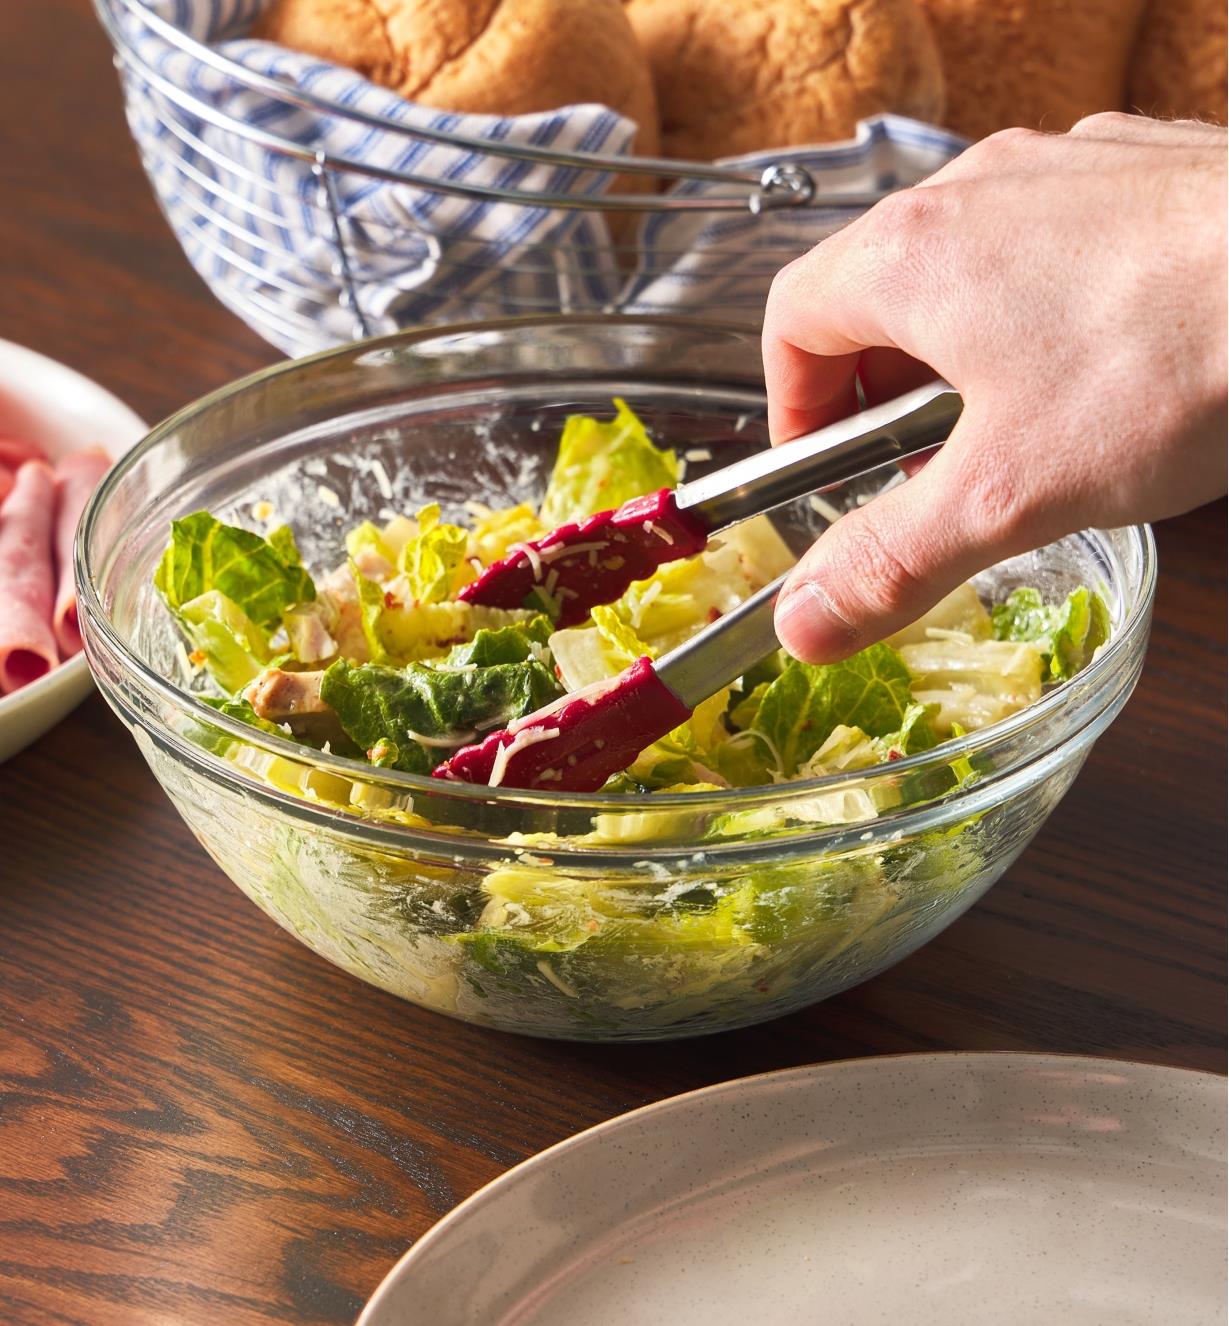 Using mini tongs to pick up salad from a bowl